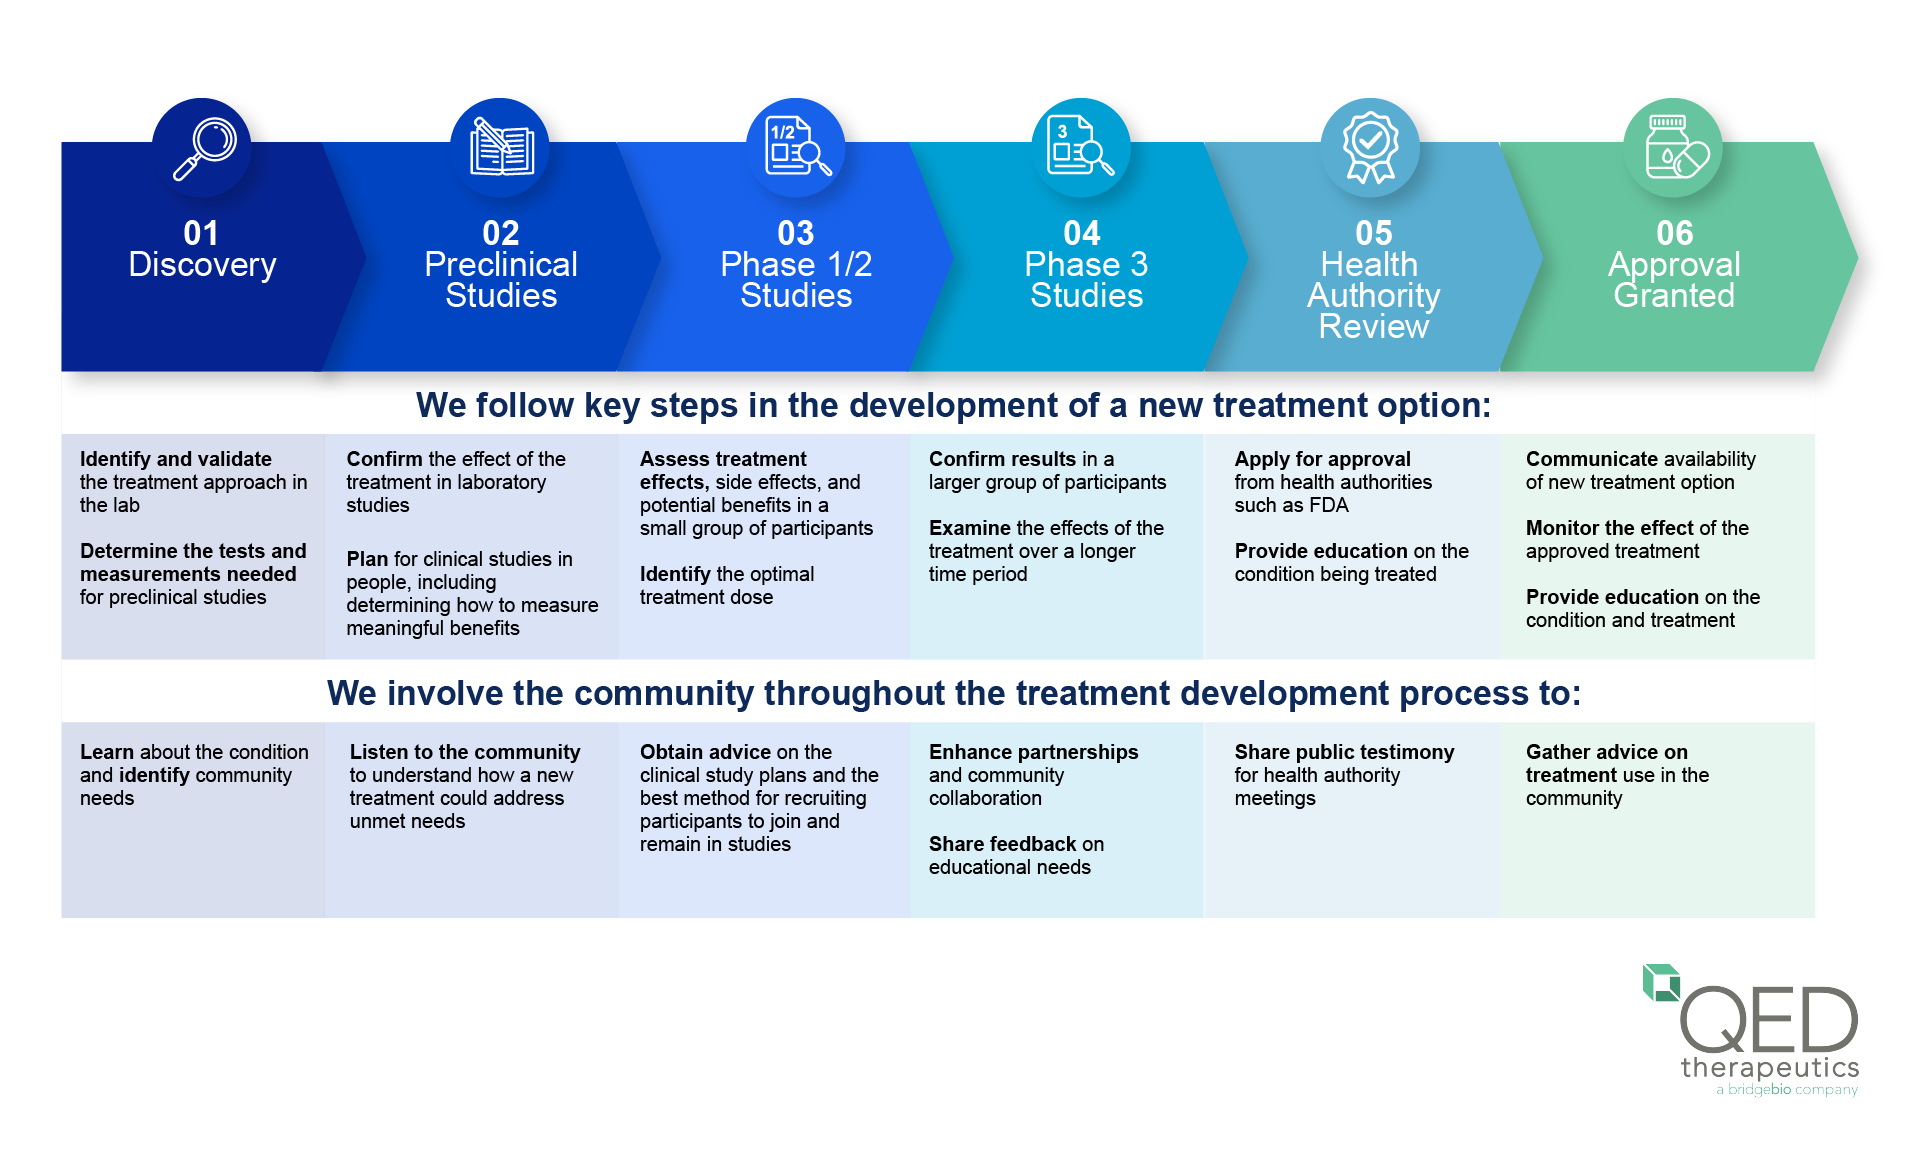 An infographic outlining the six phases of drug development. Phase 1 is 'Discovery,' where identification and validation of the treatment approach occur. Phase 2 is 'Preclinical Studies,' which involves confirming the effects of the treatment in laboratory studies. Phase 3 encompasses 'Phase 1/2 Studies,' assessing treatment effects, side effects, and dosages in a small group of participants. Phase 4, 'Phase 3 Studies,' confirms results in a larger group of participants. Phase 5 is 'Health Authority Review,' where the treatment is reviewed and approved by health authorities. Finally, Phase 6 is 'Approval Granted,' where treatment availability is monitored, and education on the condition and treatment is provided. Below these phases, the infographic emphasizes community involvement throughout the development process with strategies like listening to community needs, inviting dialogue on the condition and treatment, ensuring community participation, sharing results transparently, and gathering advice on treatment use in the community.